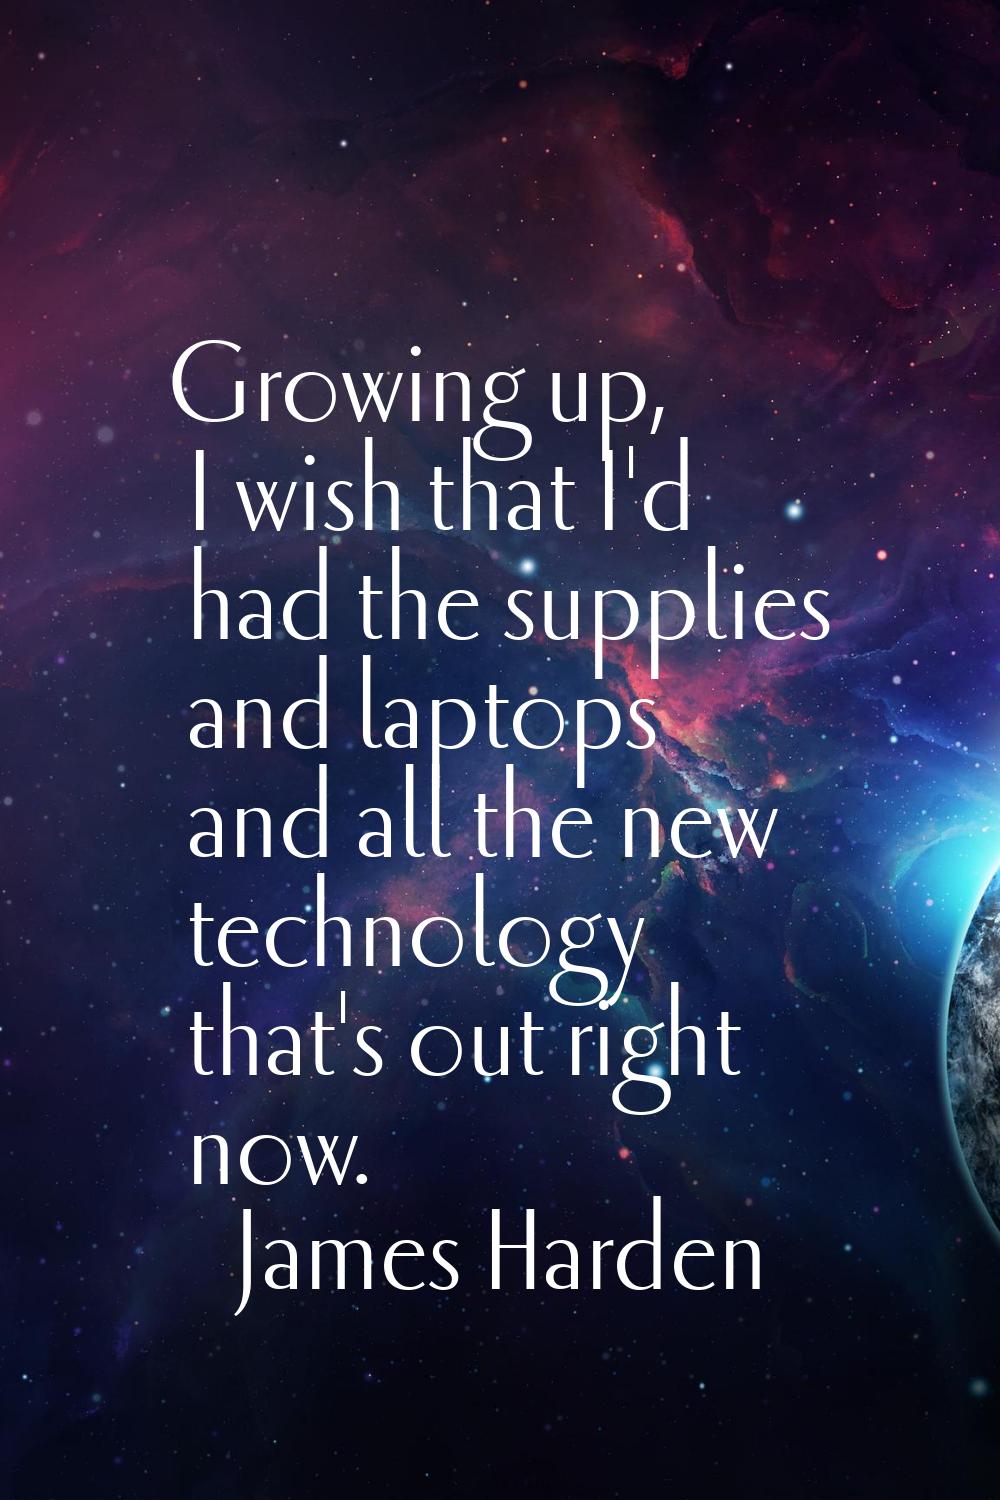 Growing up, I wish that I'd had the supplies and laptops and all the new technology that's out righ